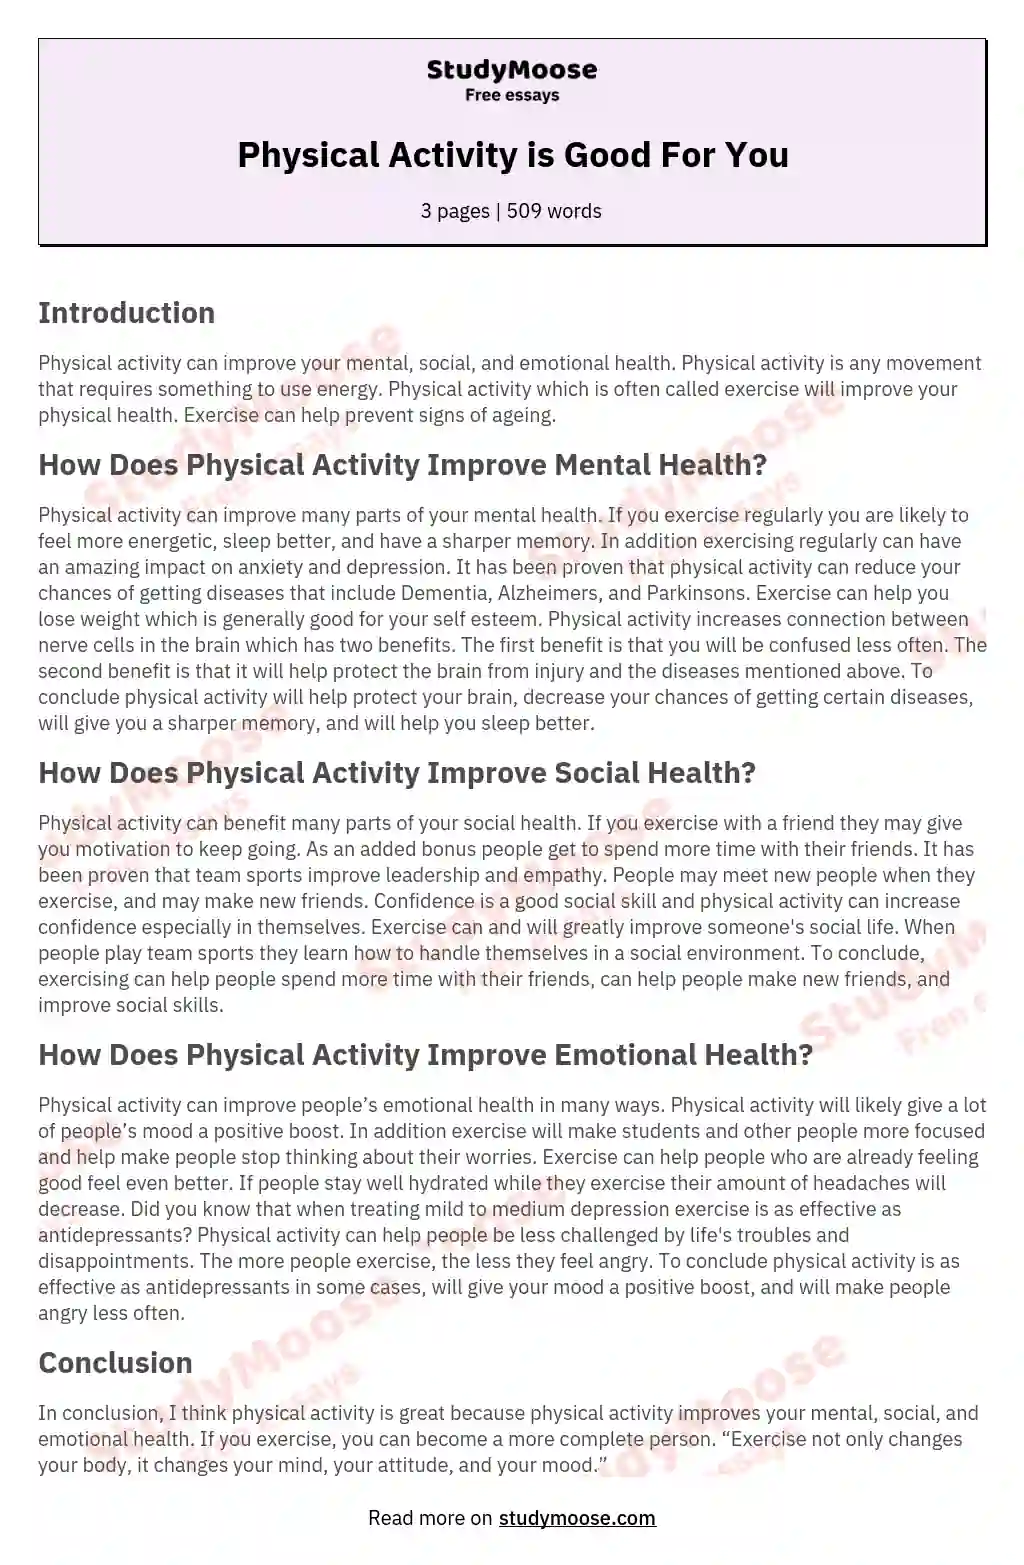 essay introduction about physical activity